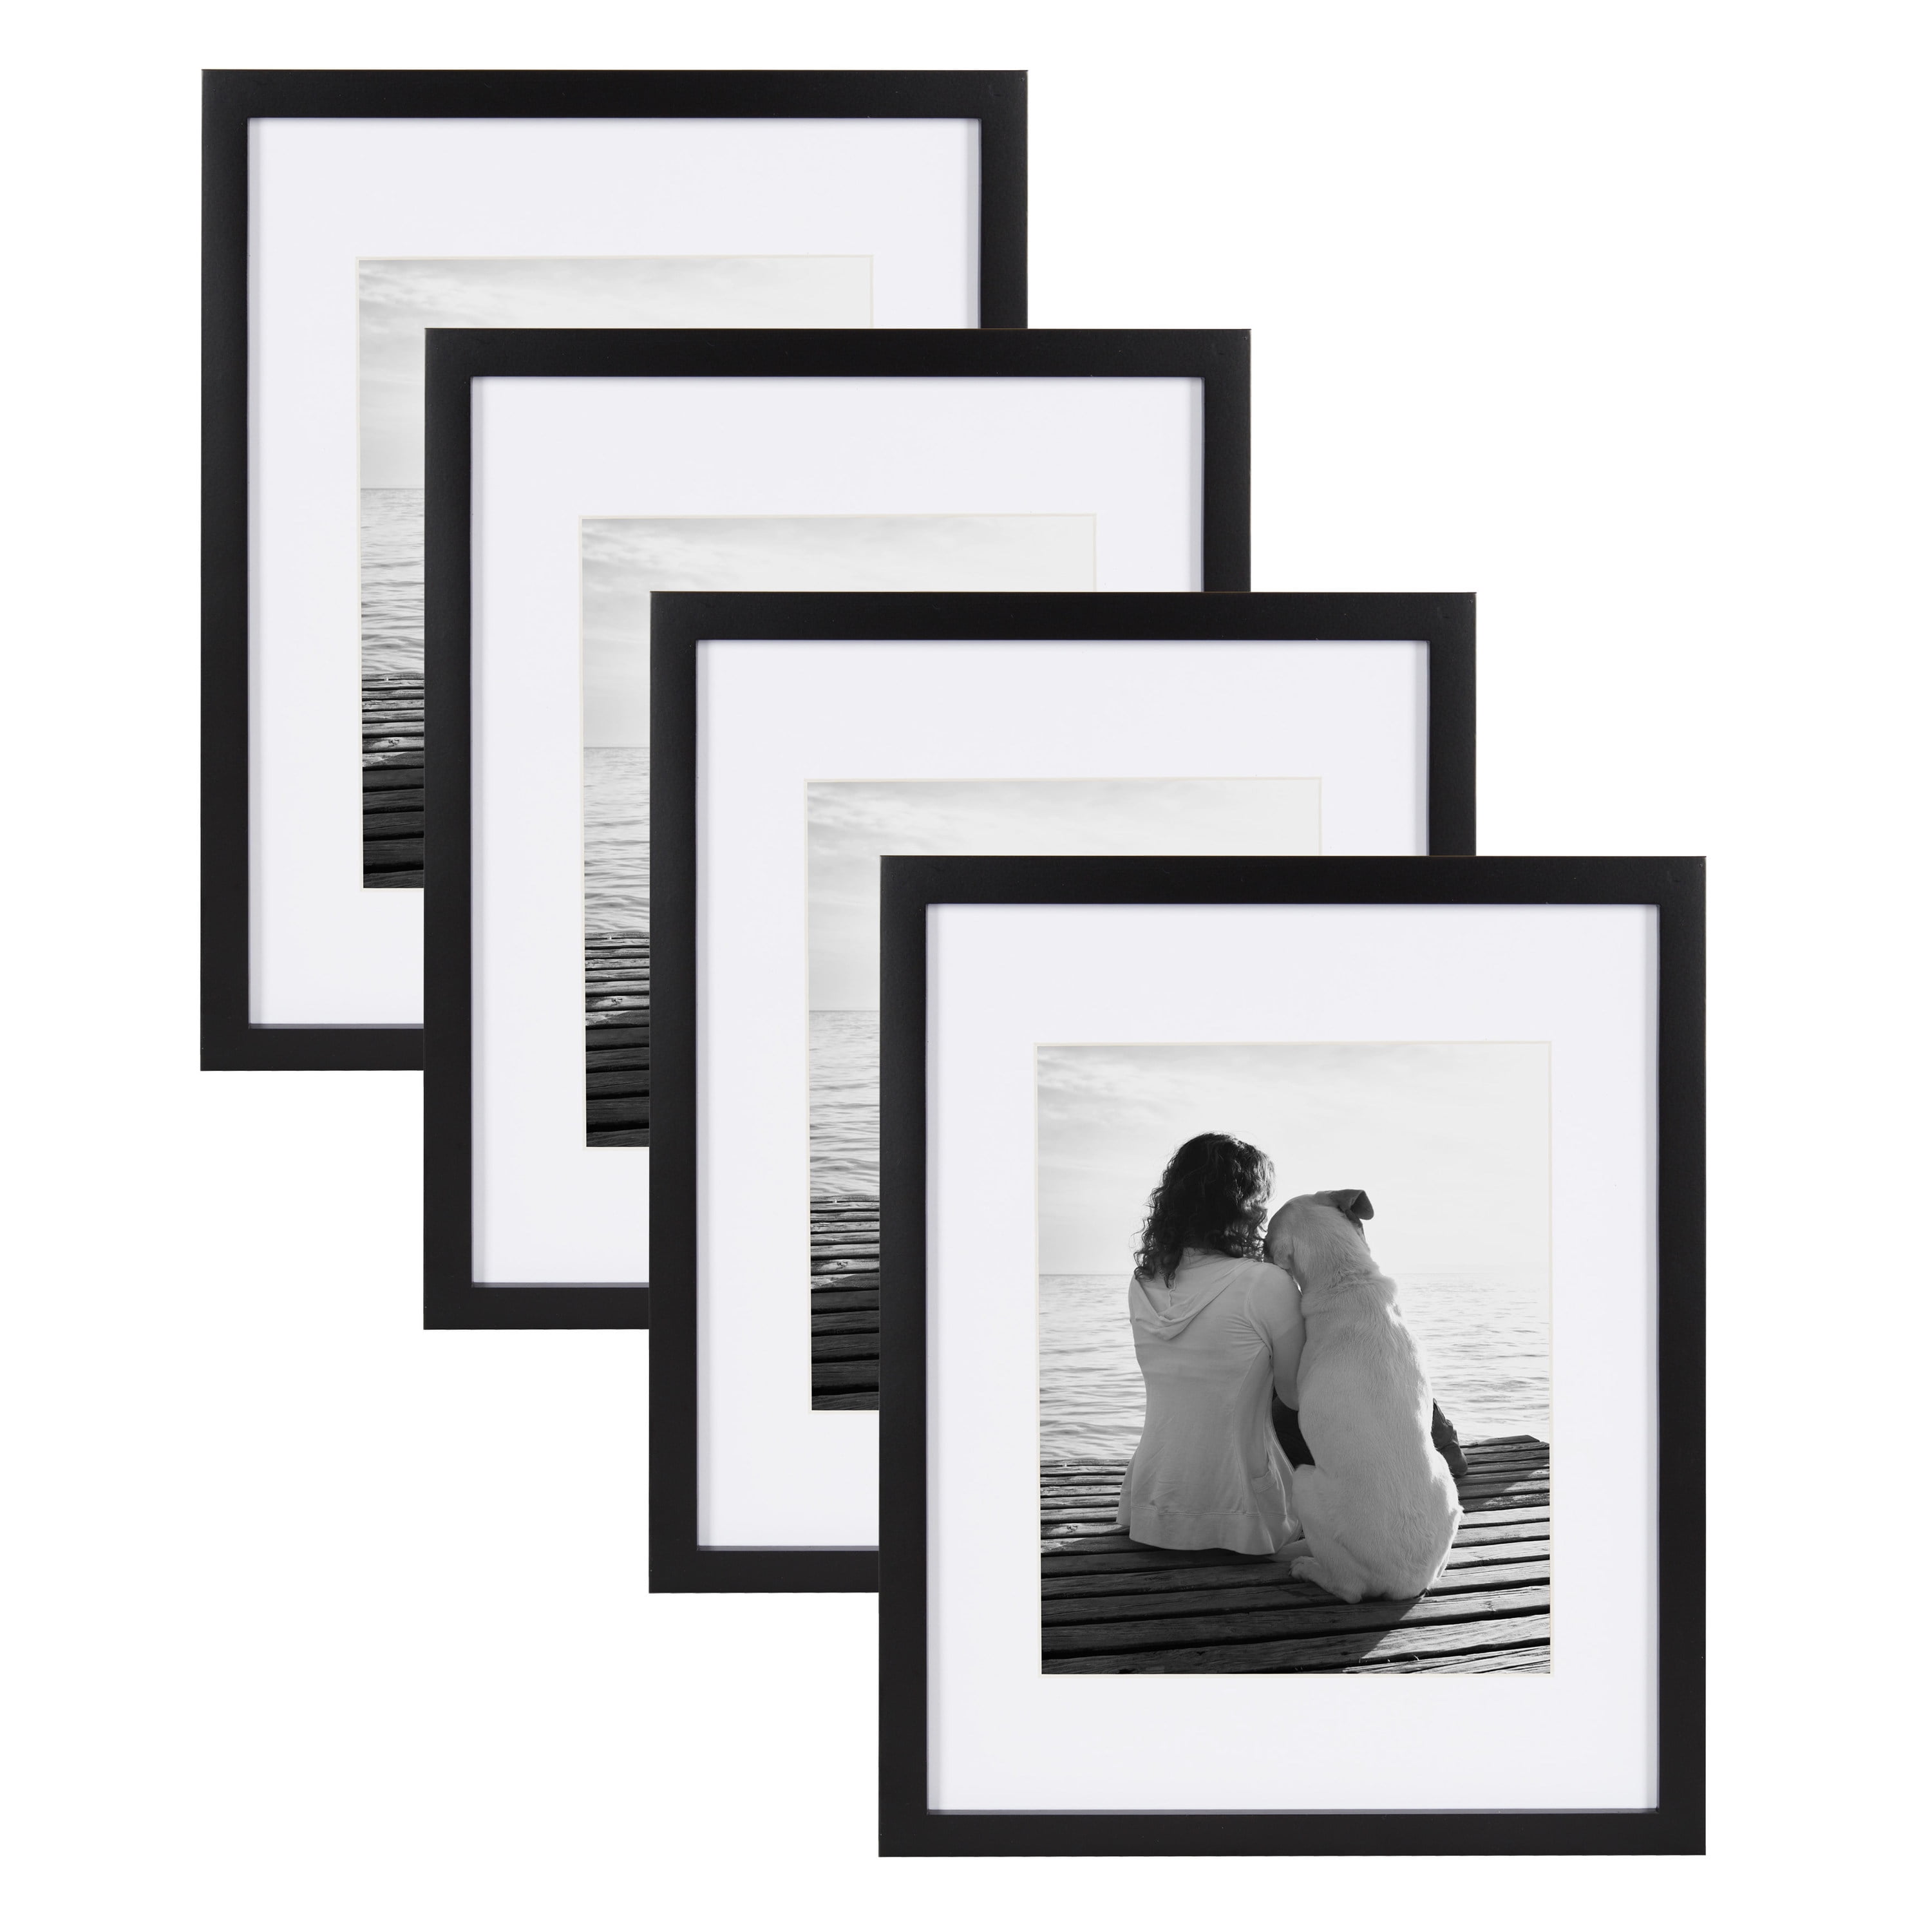 Small Boulevard Set of 11 Individual Wall Photo Frames Wall Decor Set (  Size 4x6, 5x5, 6x8, 8x10 inches )